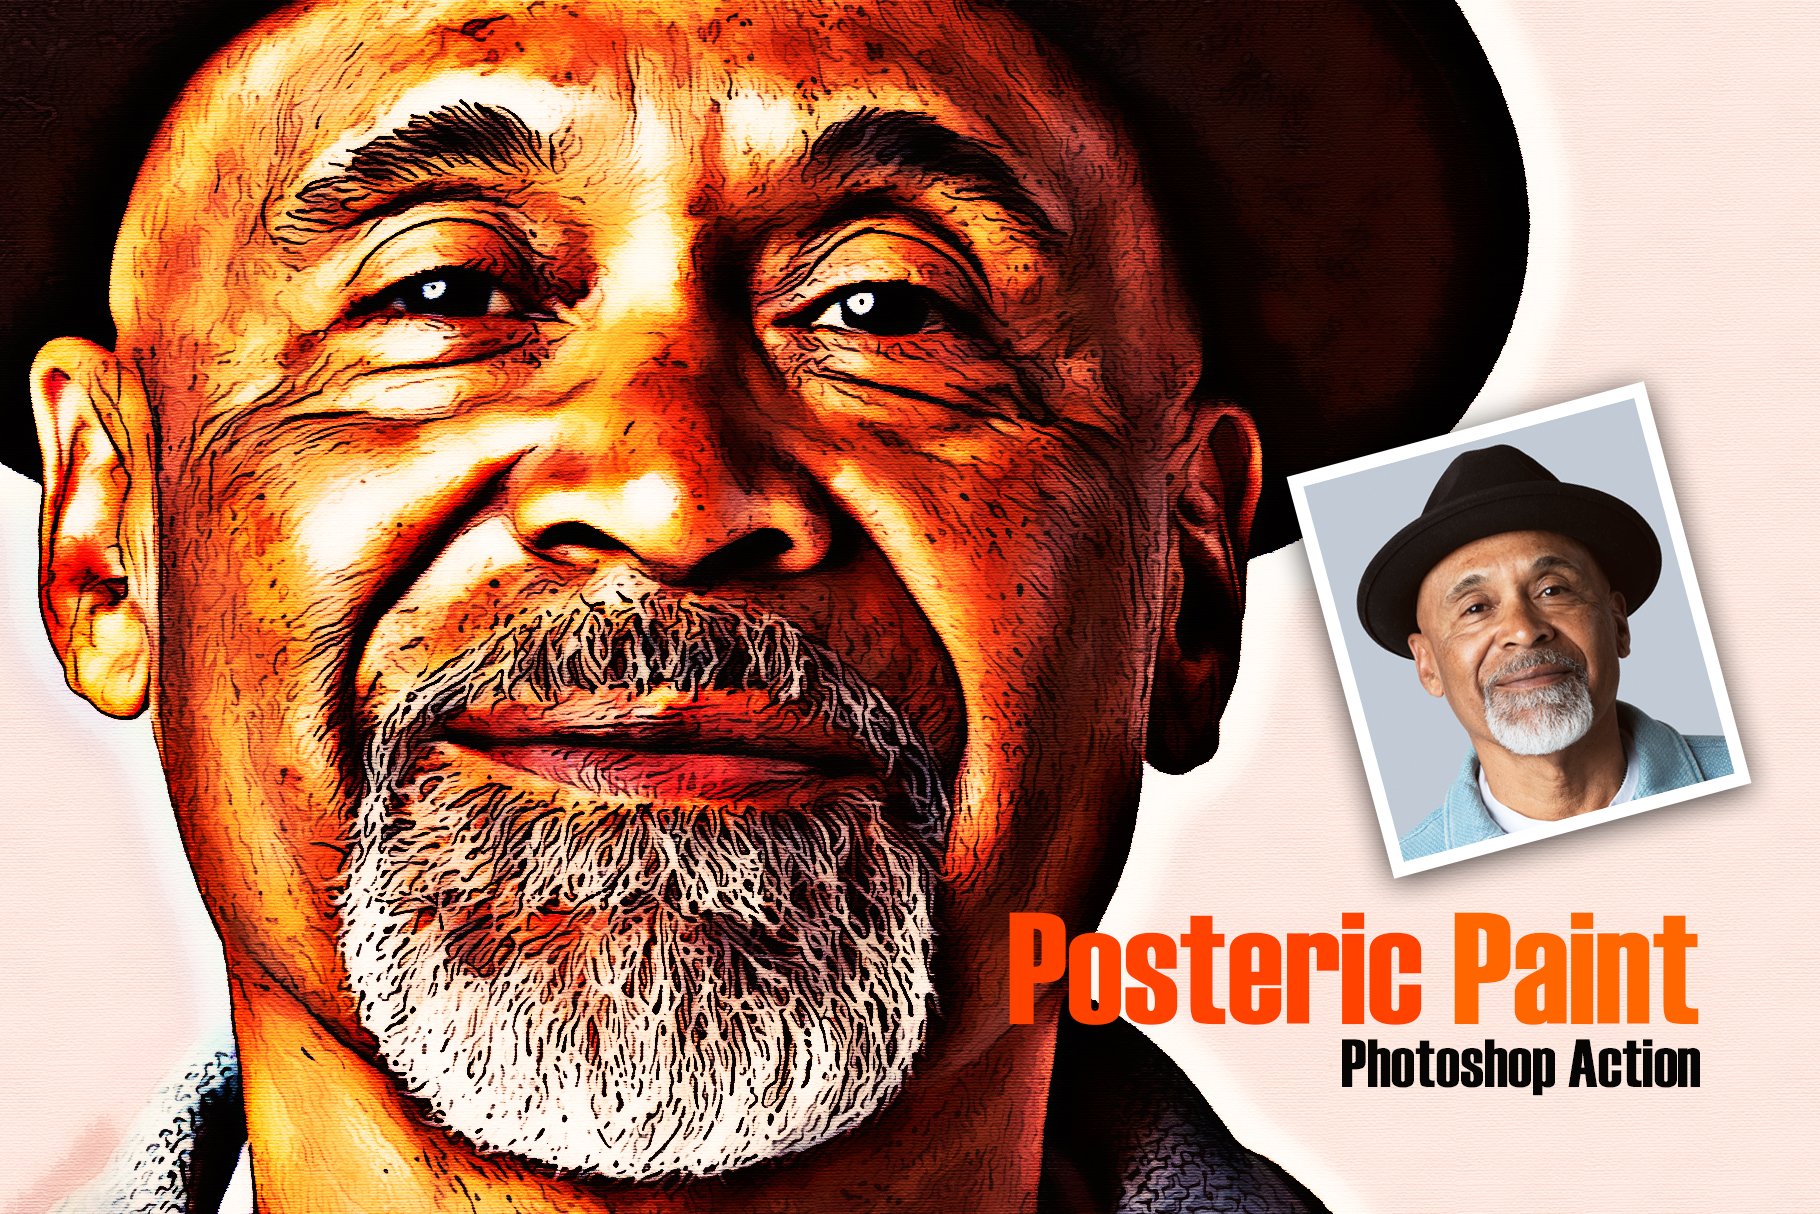 Posteric Paint Photoshop Actioncover image.